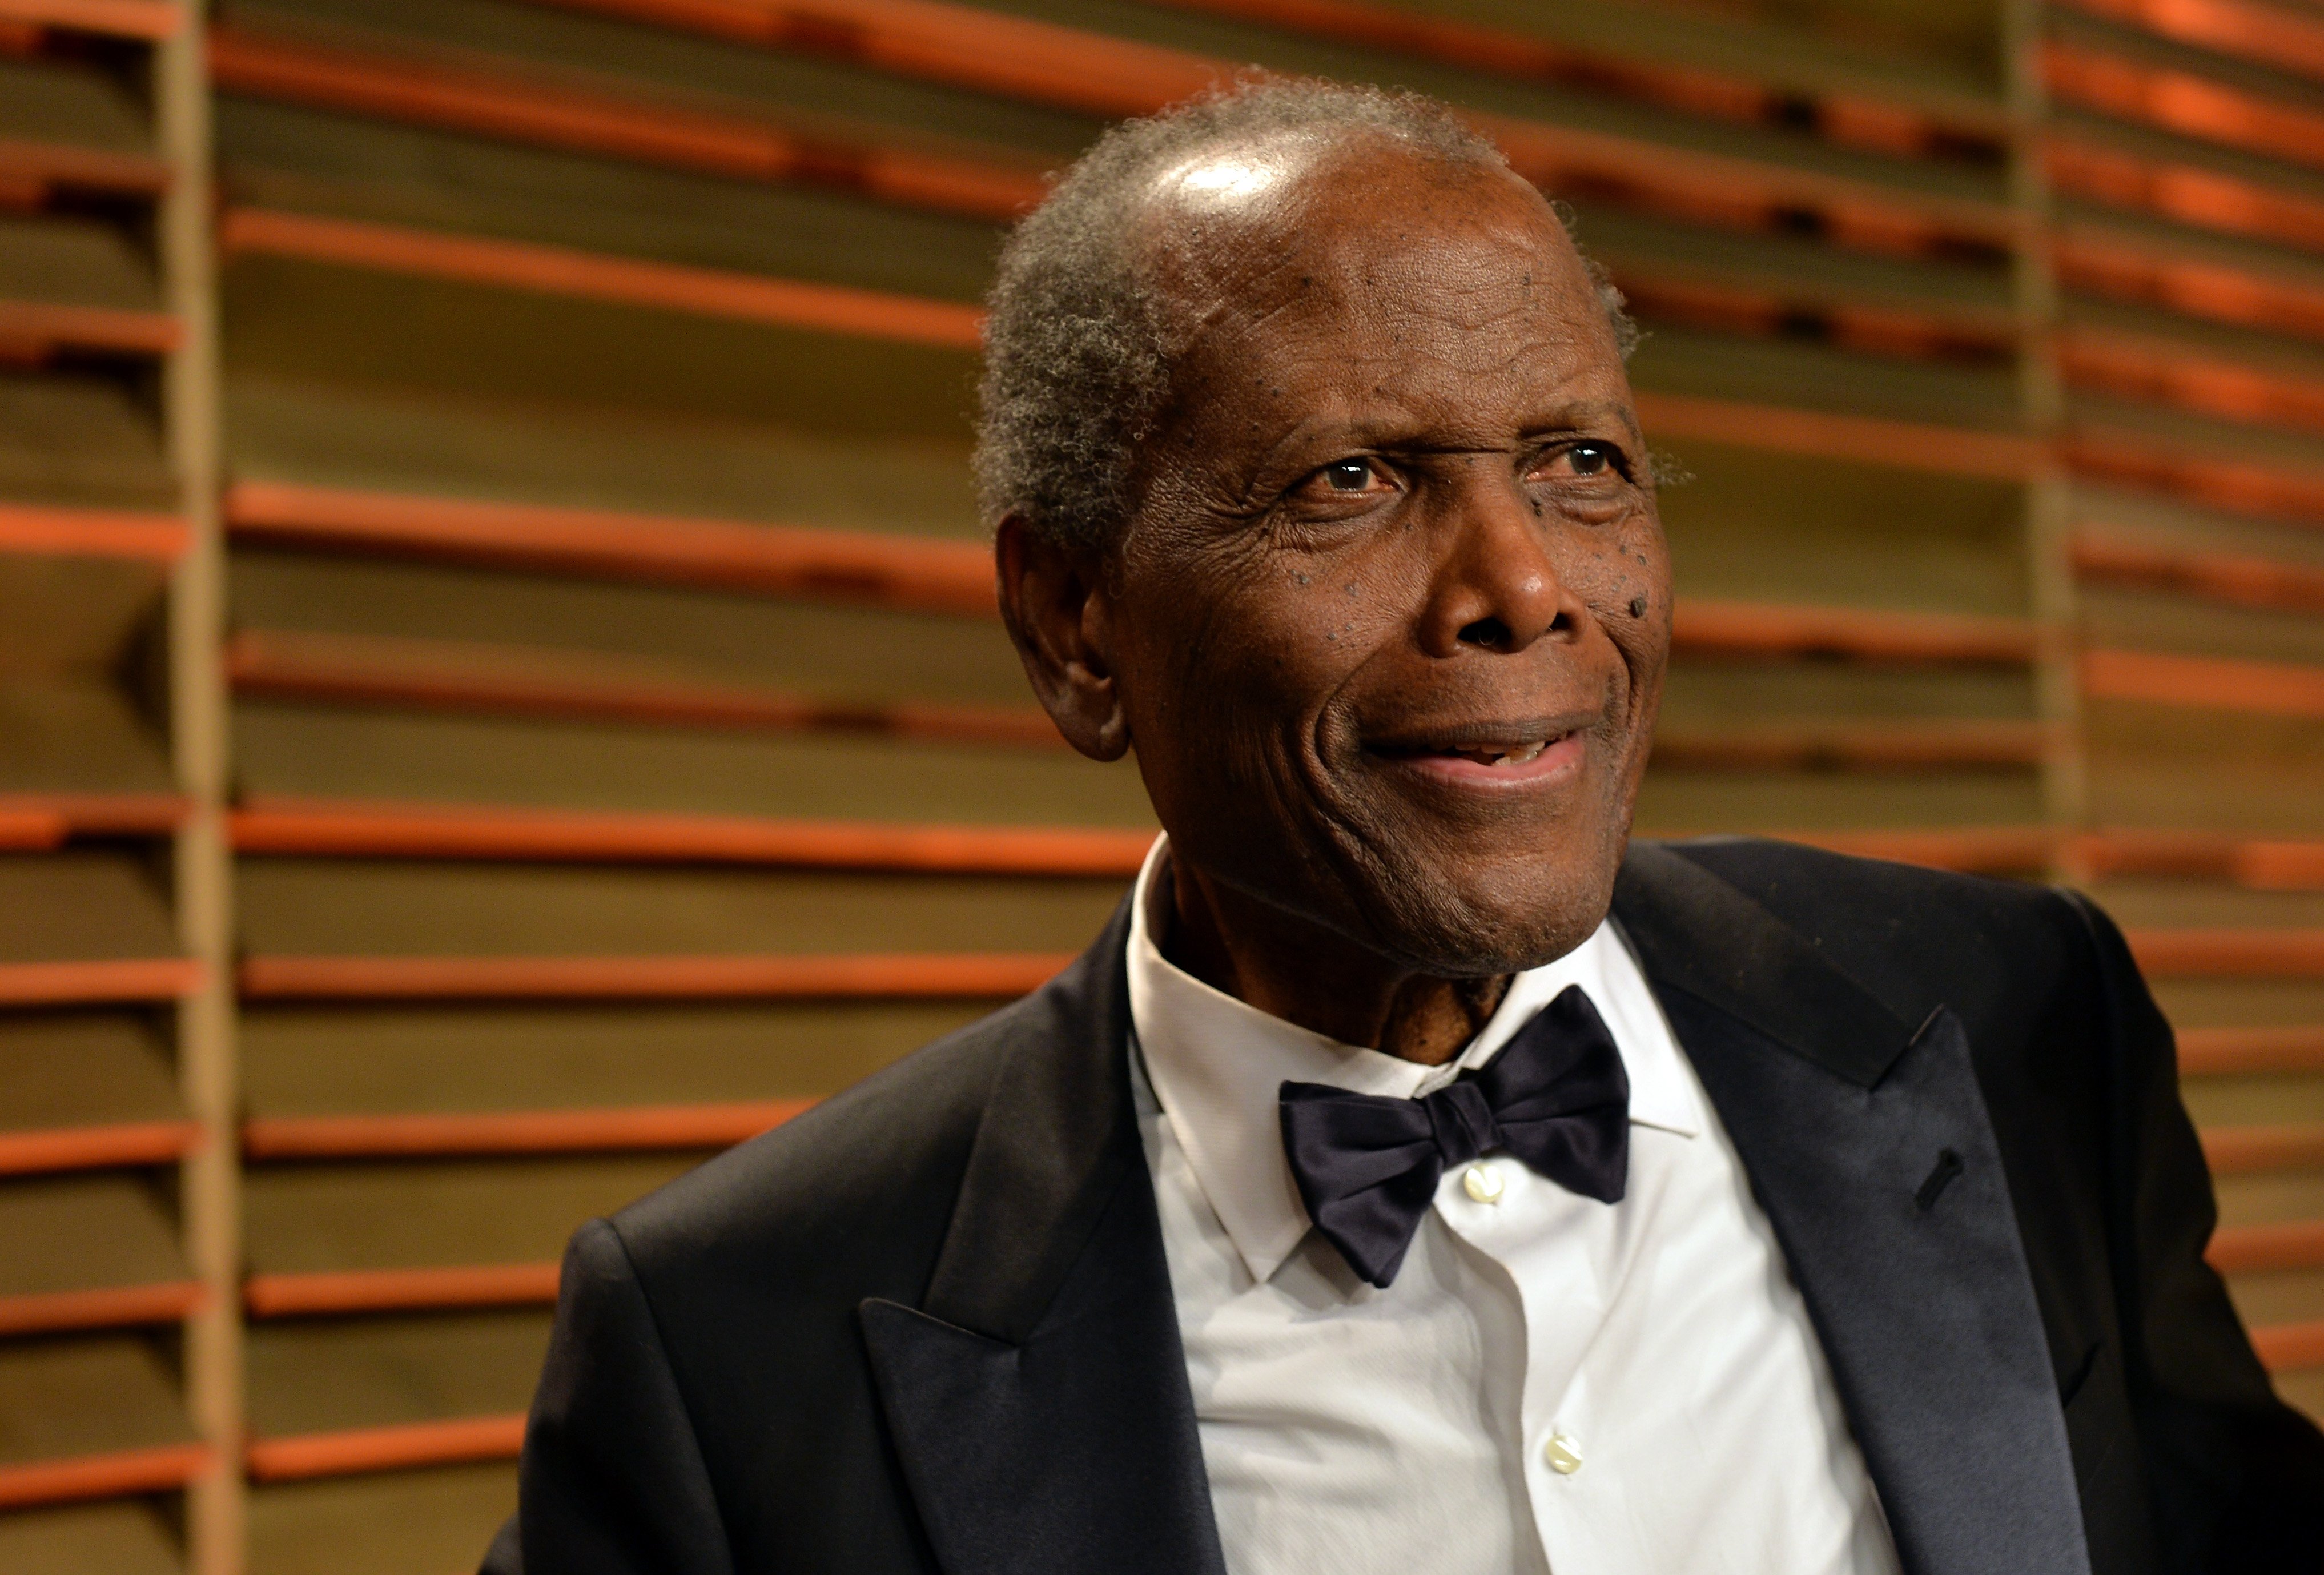 Sidney Poitier attends the 2014 Vanity Fair Oscar Party on March 2, 2014. | Photo: Getty Images